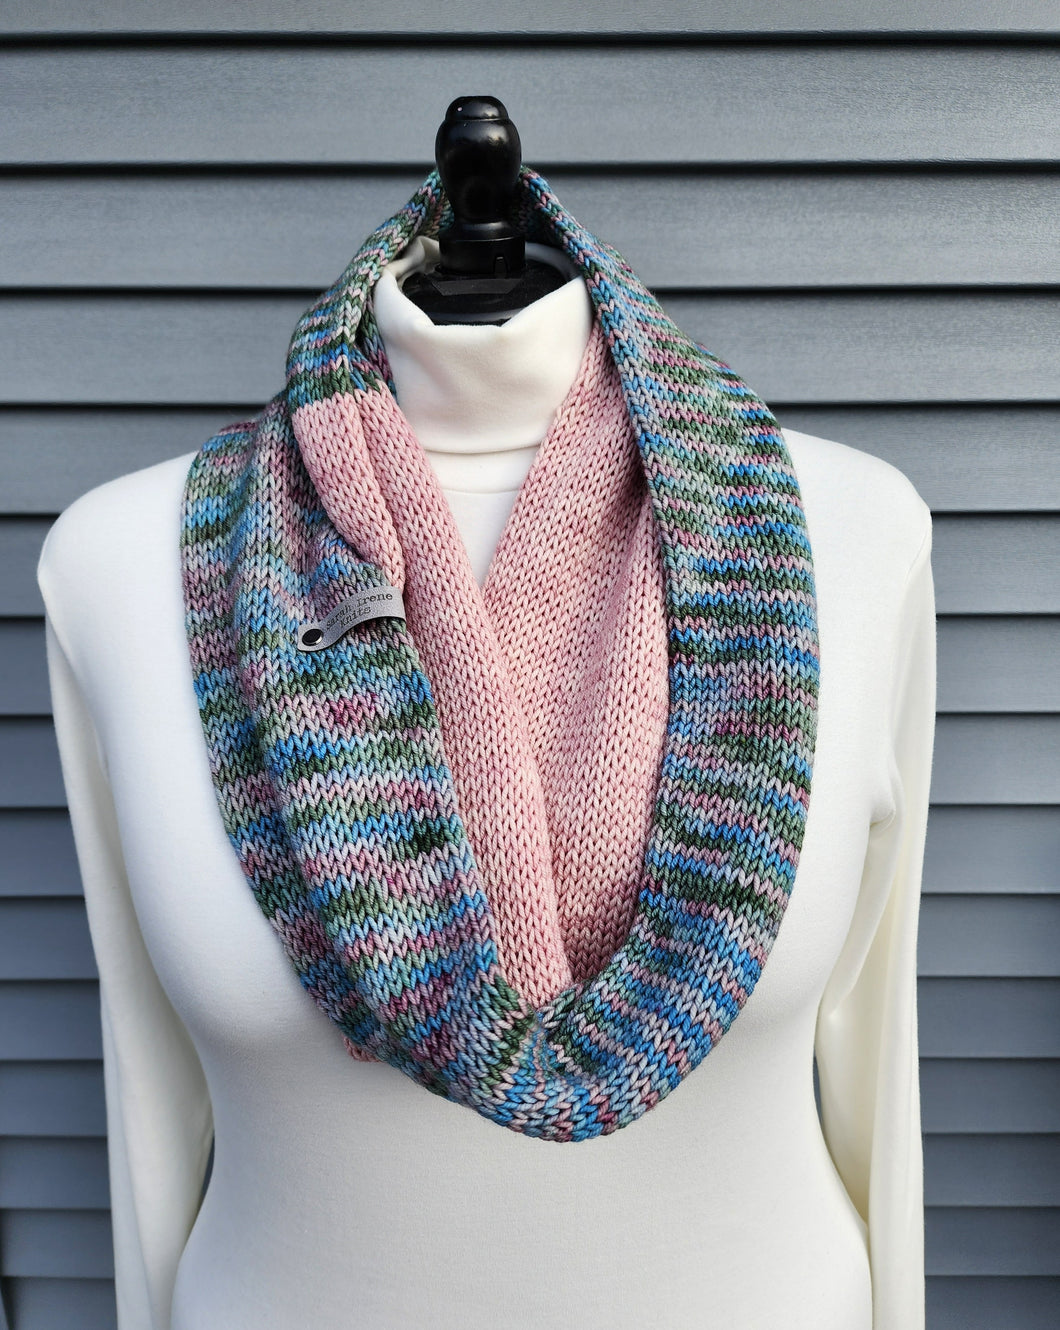 Infinity scarf in multicolor yarn with blues, greens, and pinks plus a block of solid pink yarn.